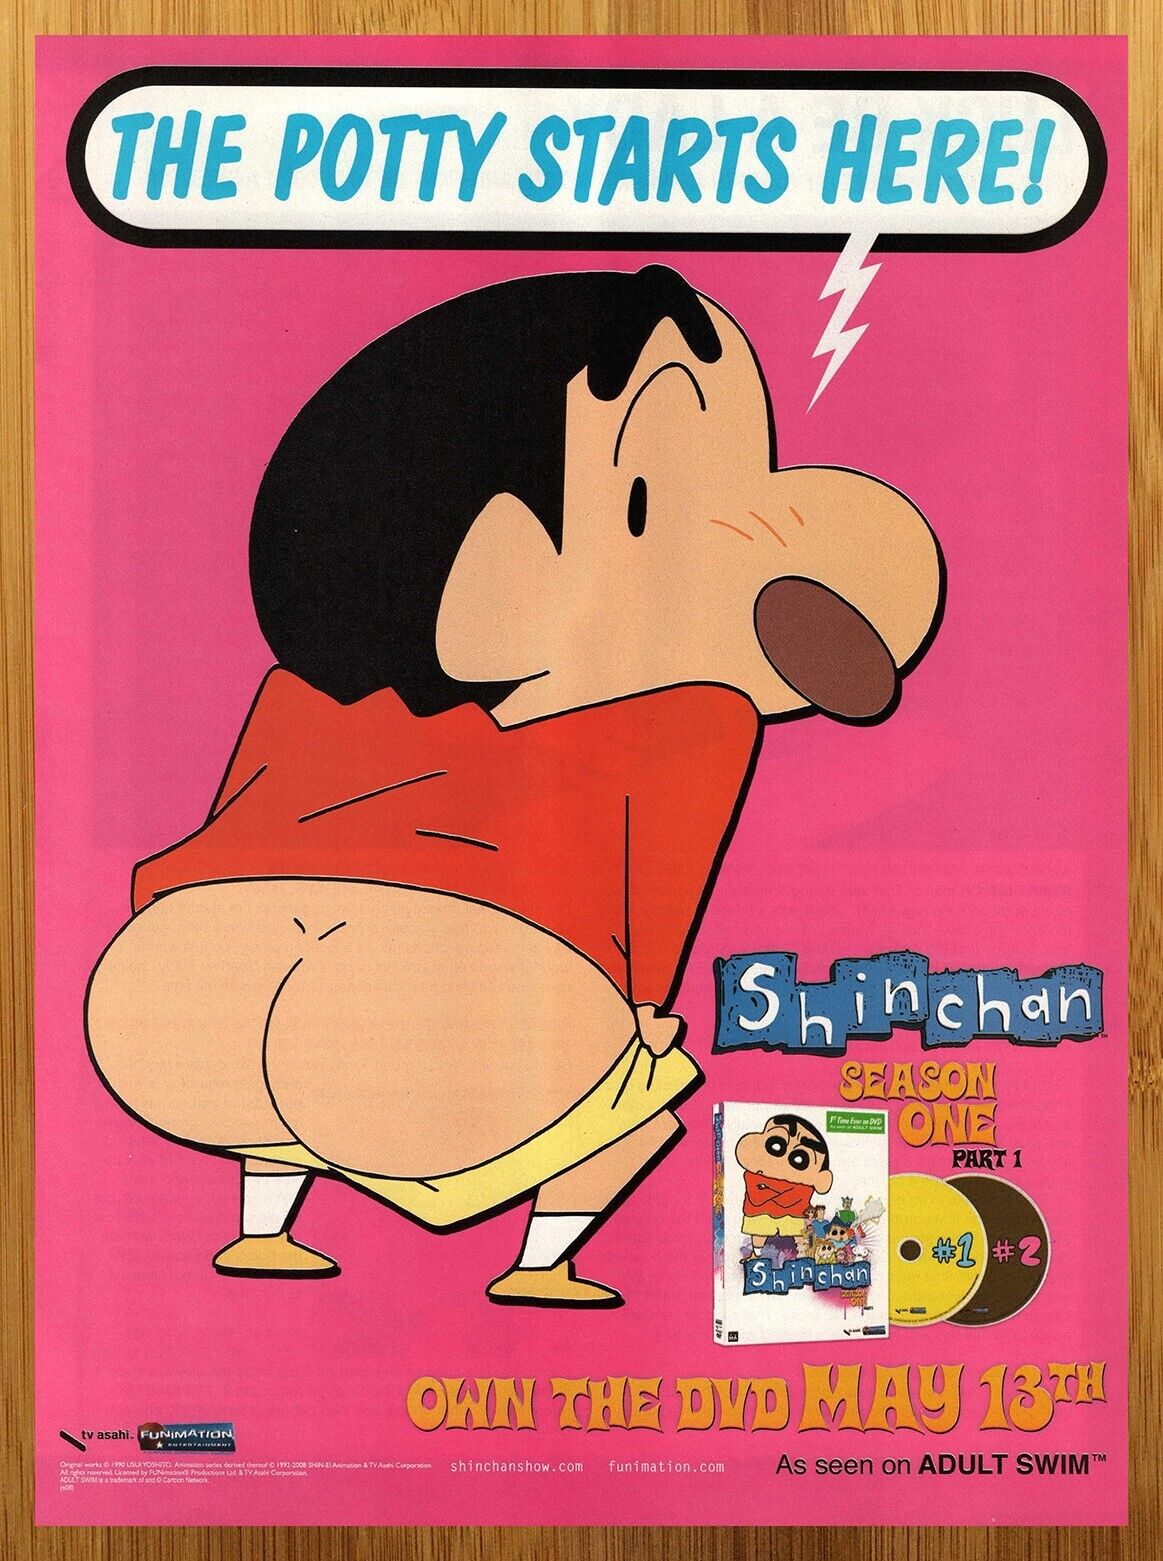 2008 Shinchen Print Ad/Poster Official Adult Swim Comedy Anime DVD Promo Art 00s